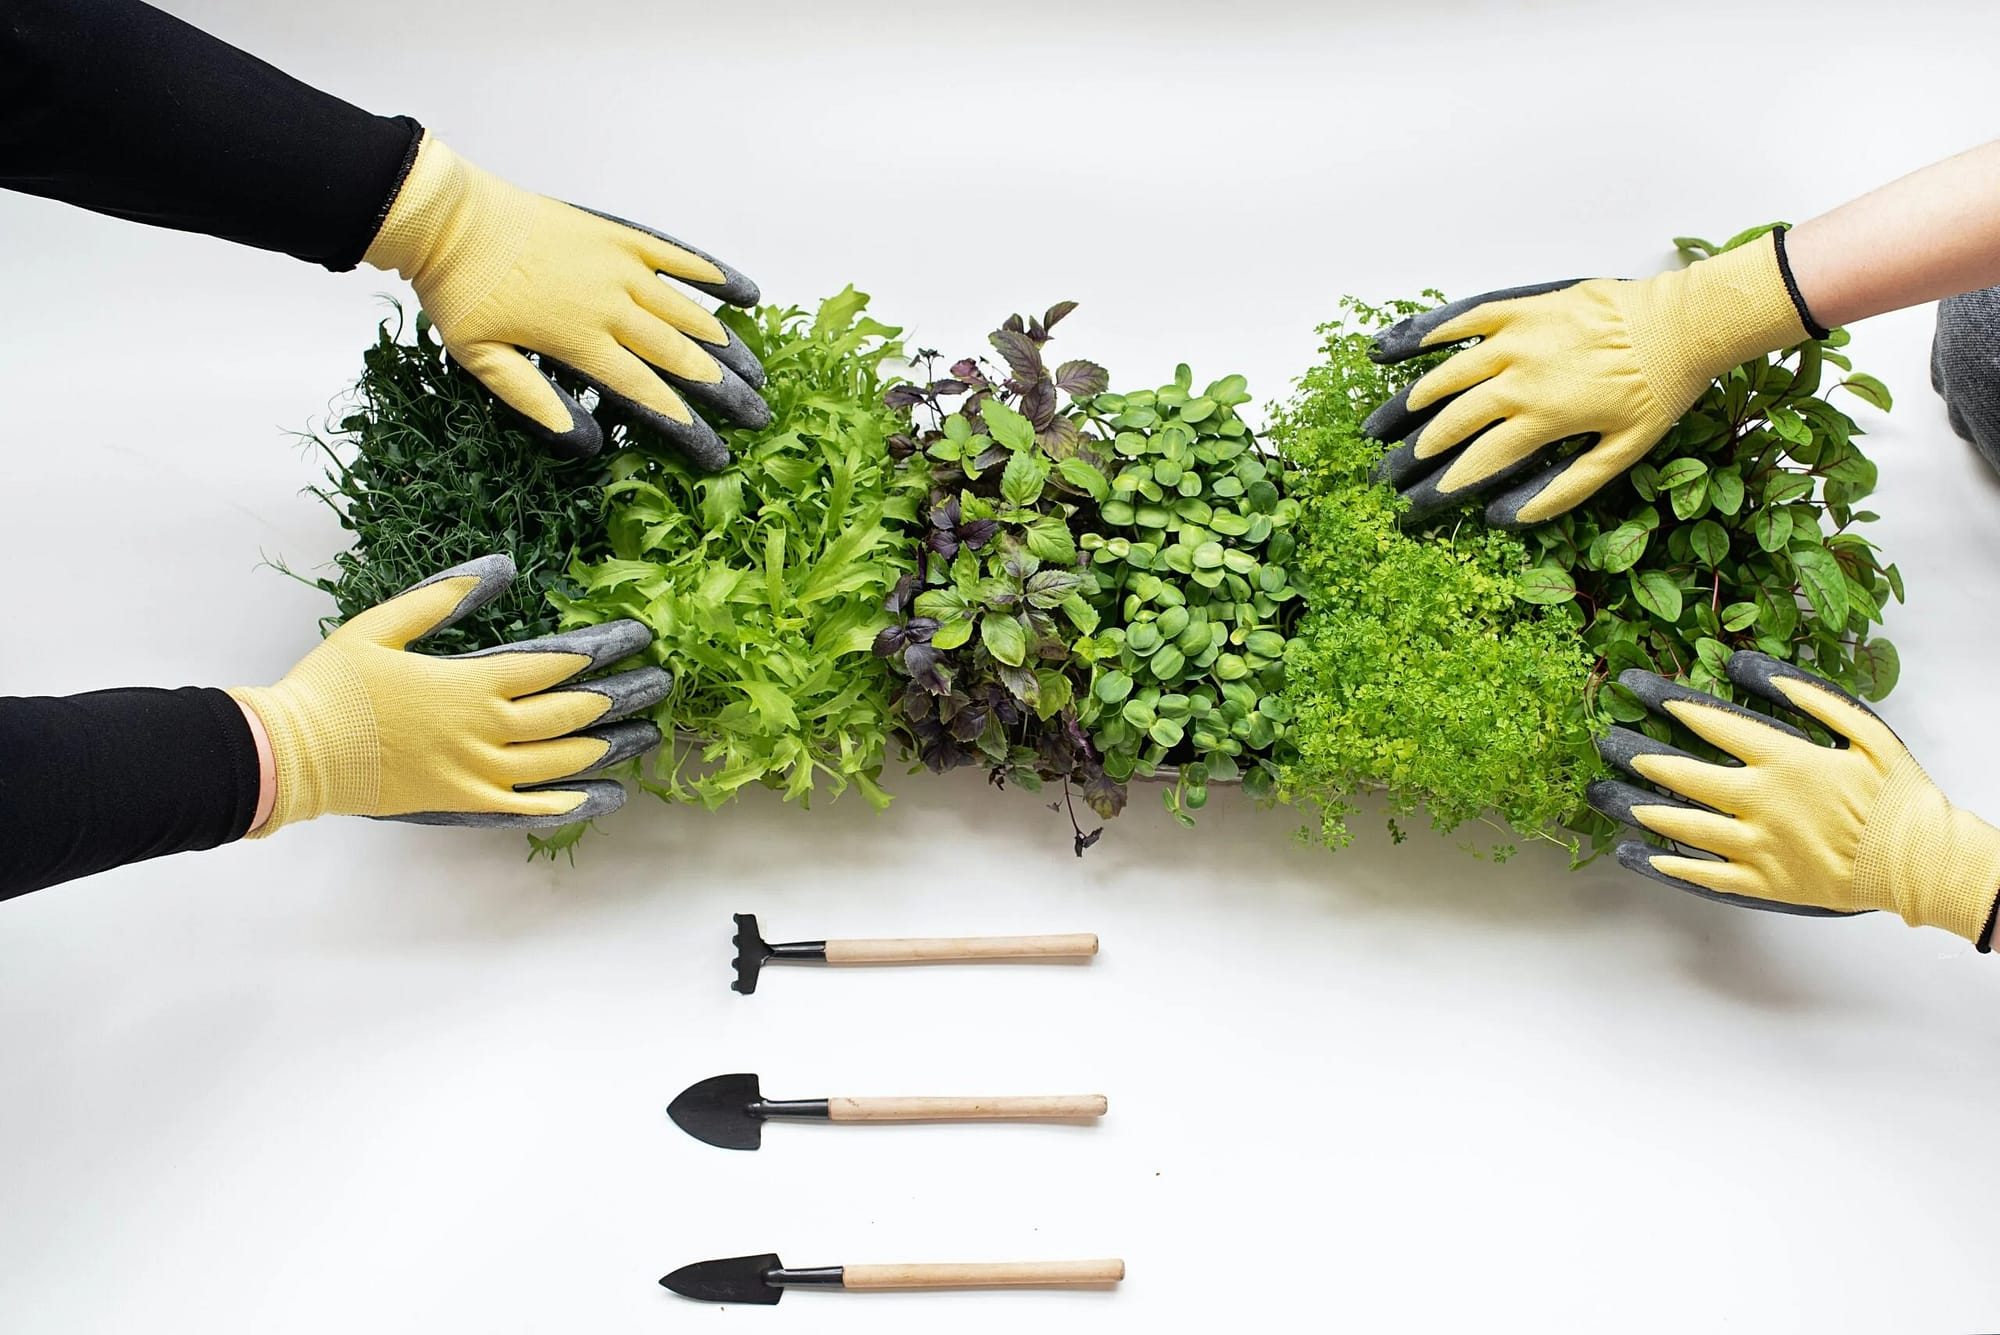 two sets of hands and arms tending to microgreens there is 3 different tools aswell that is shown